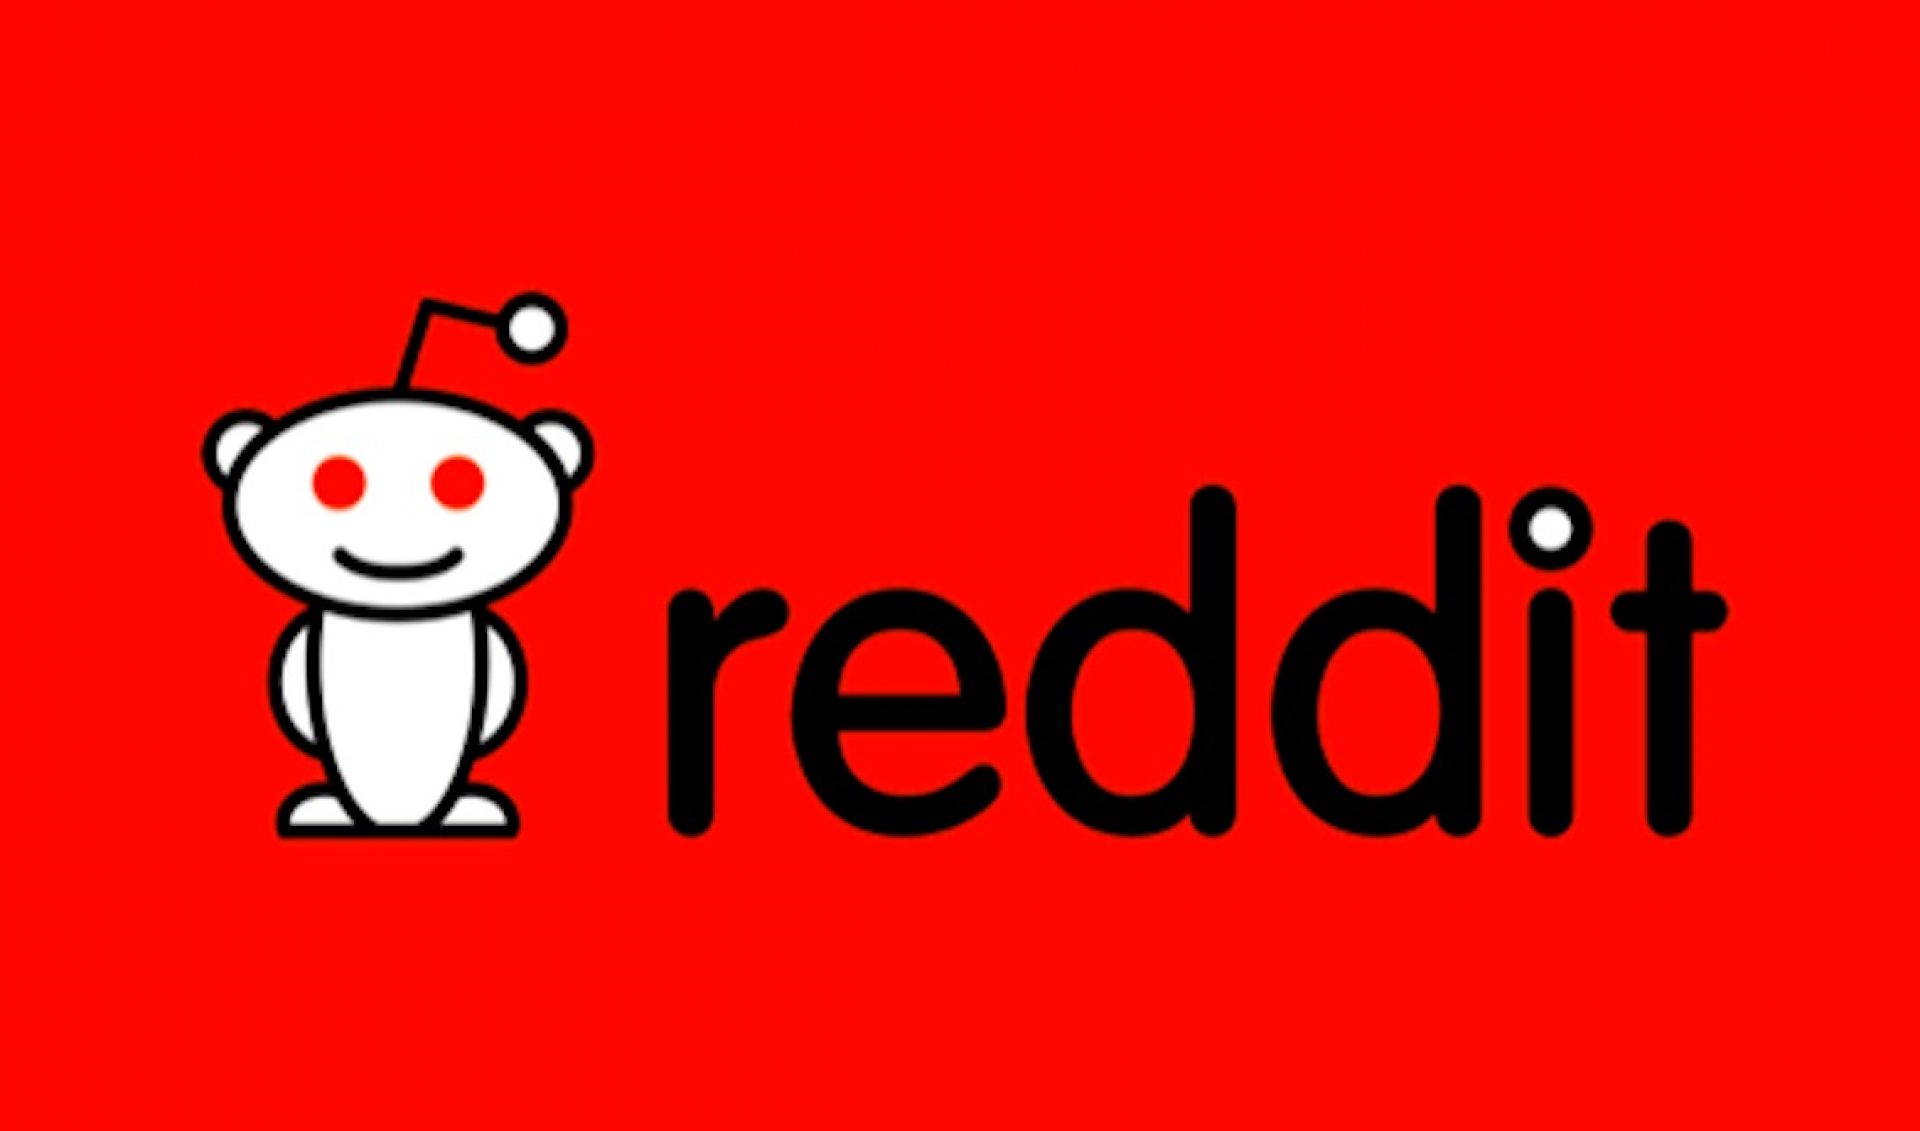 Reddit Announces Native Auto-Play Video Ads For Select Brands